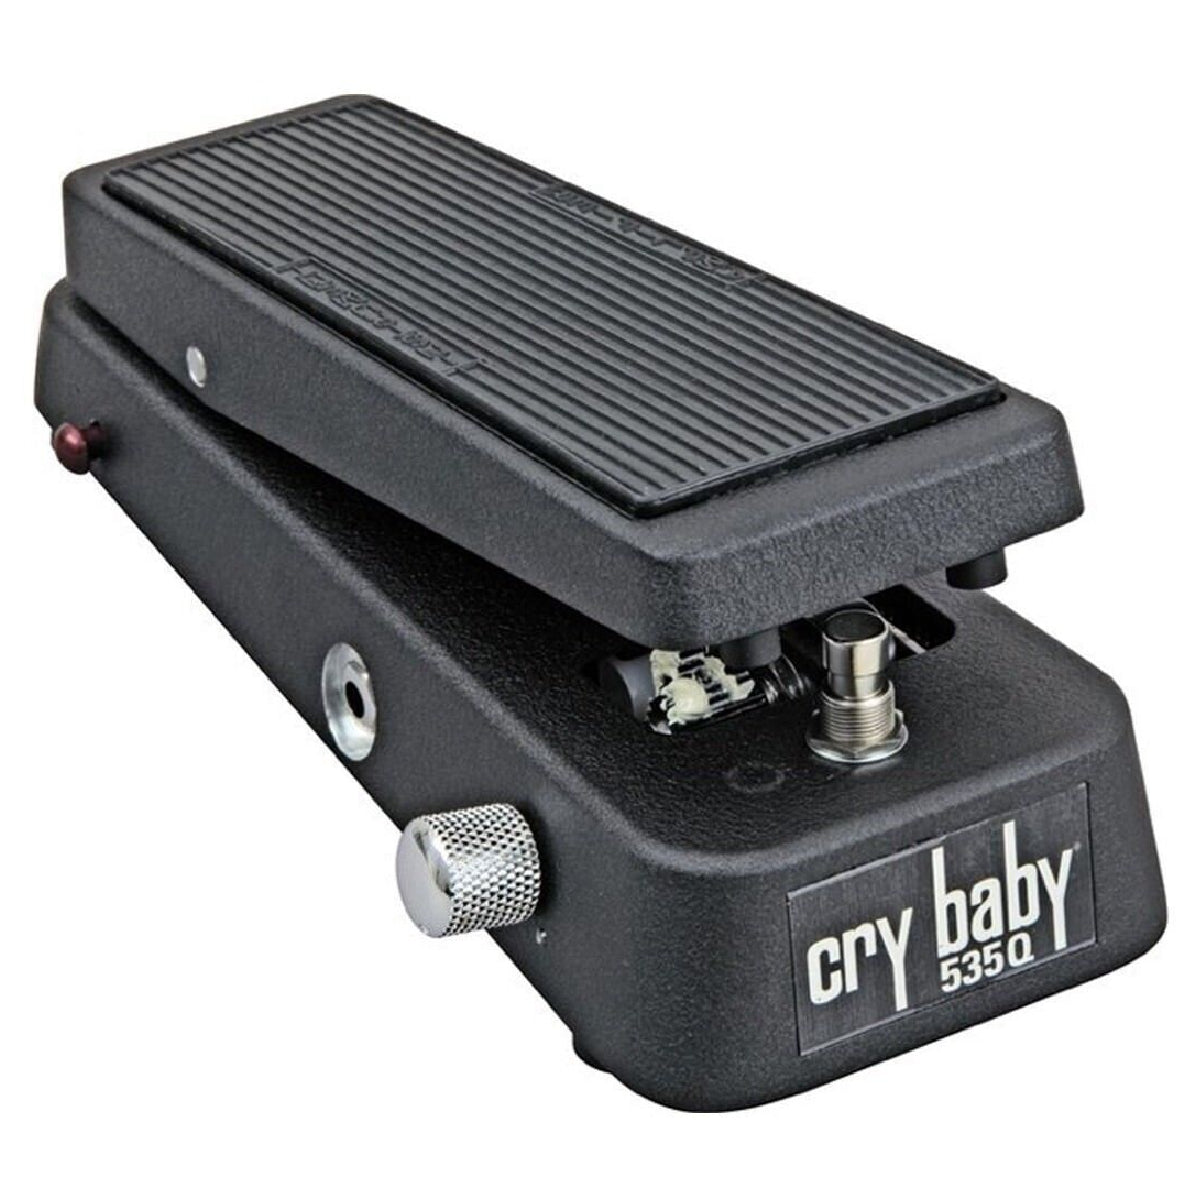 Dunlop Cry Baby Multi-wah Pedal - Black 535Q-B Front